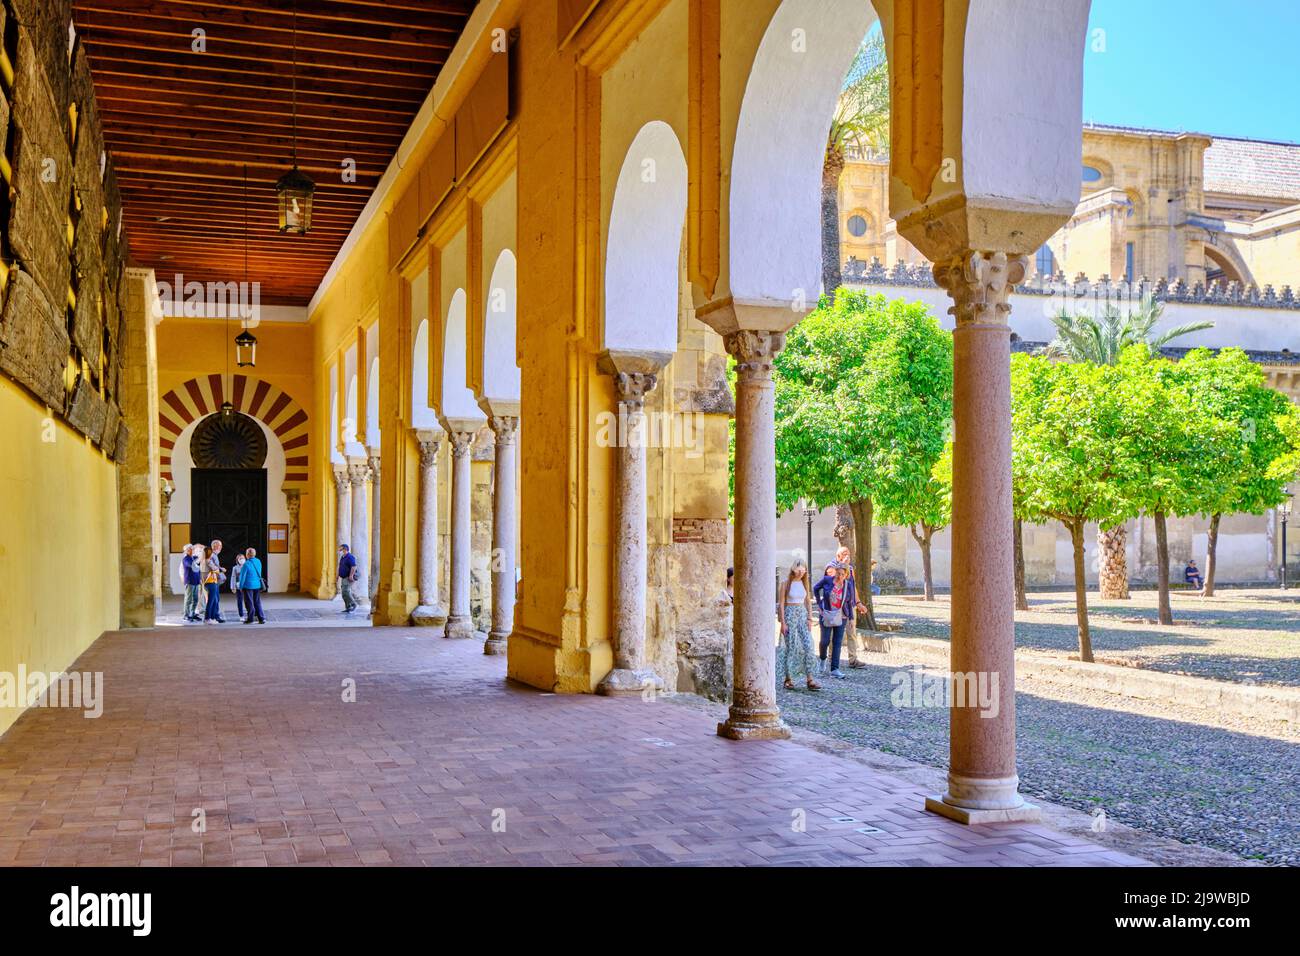 Mezquita-Catedral (Mosque-Cathedral) of Cordoba, a UNESCO World Heritage Site. Patio de los Naranjos. Andalucia, Spain Stock Photo